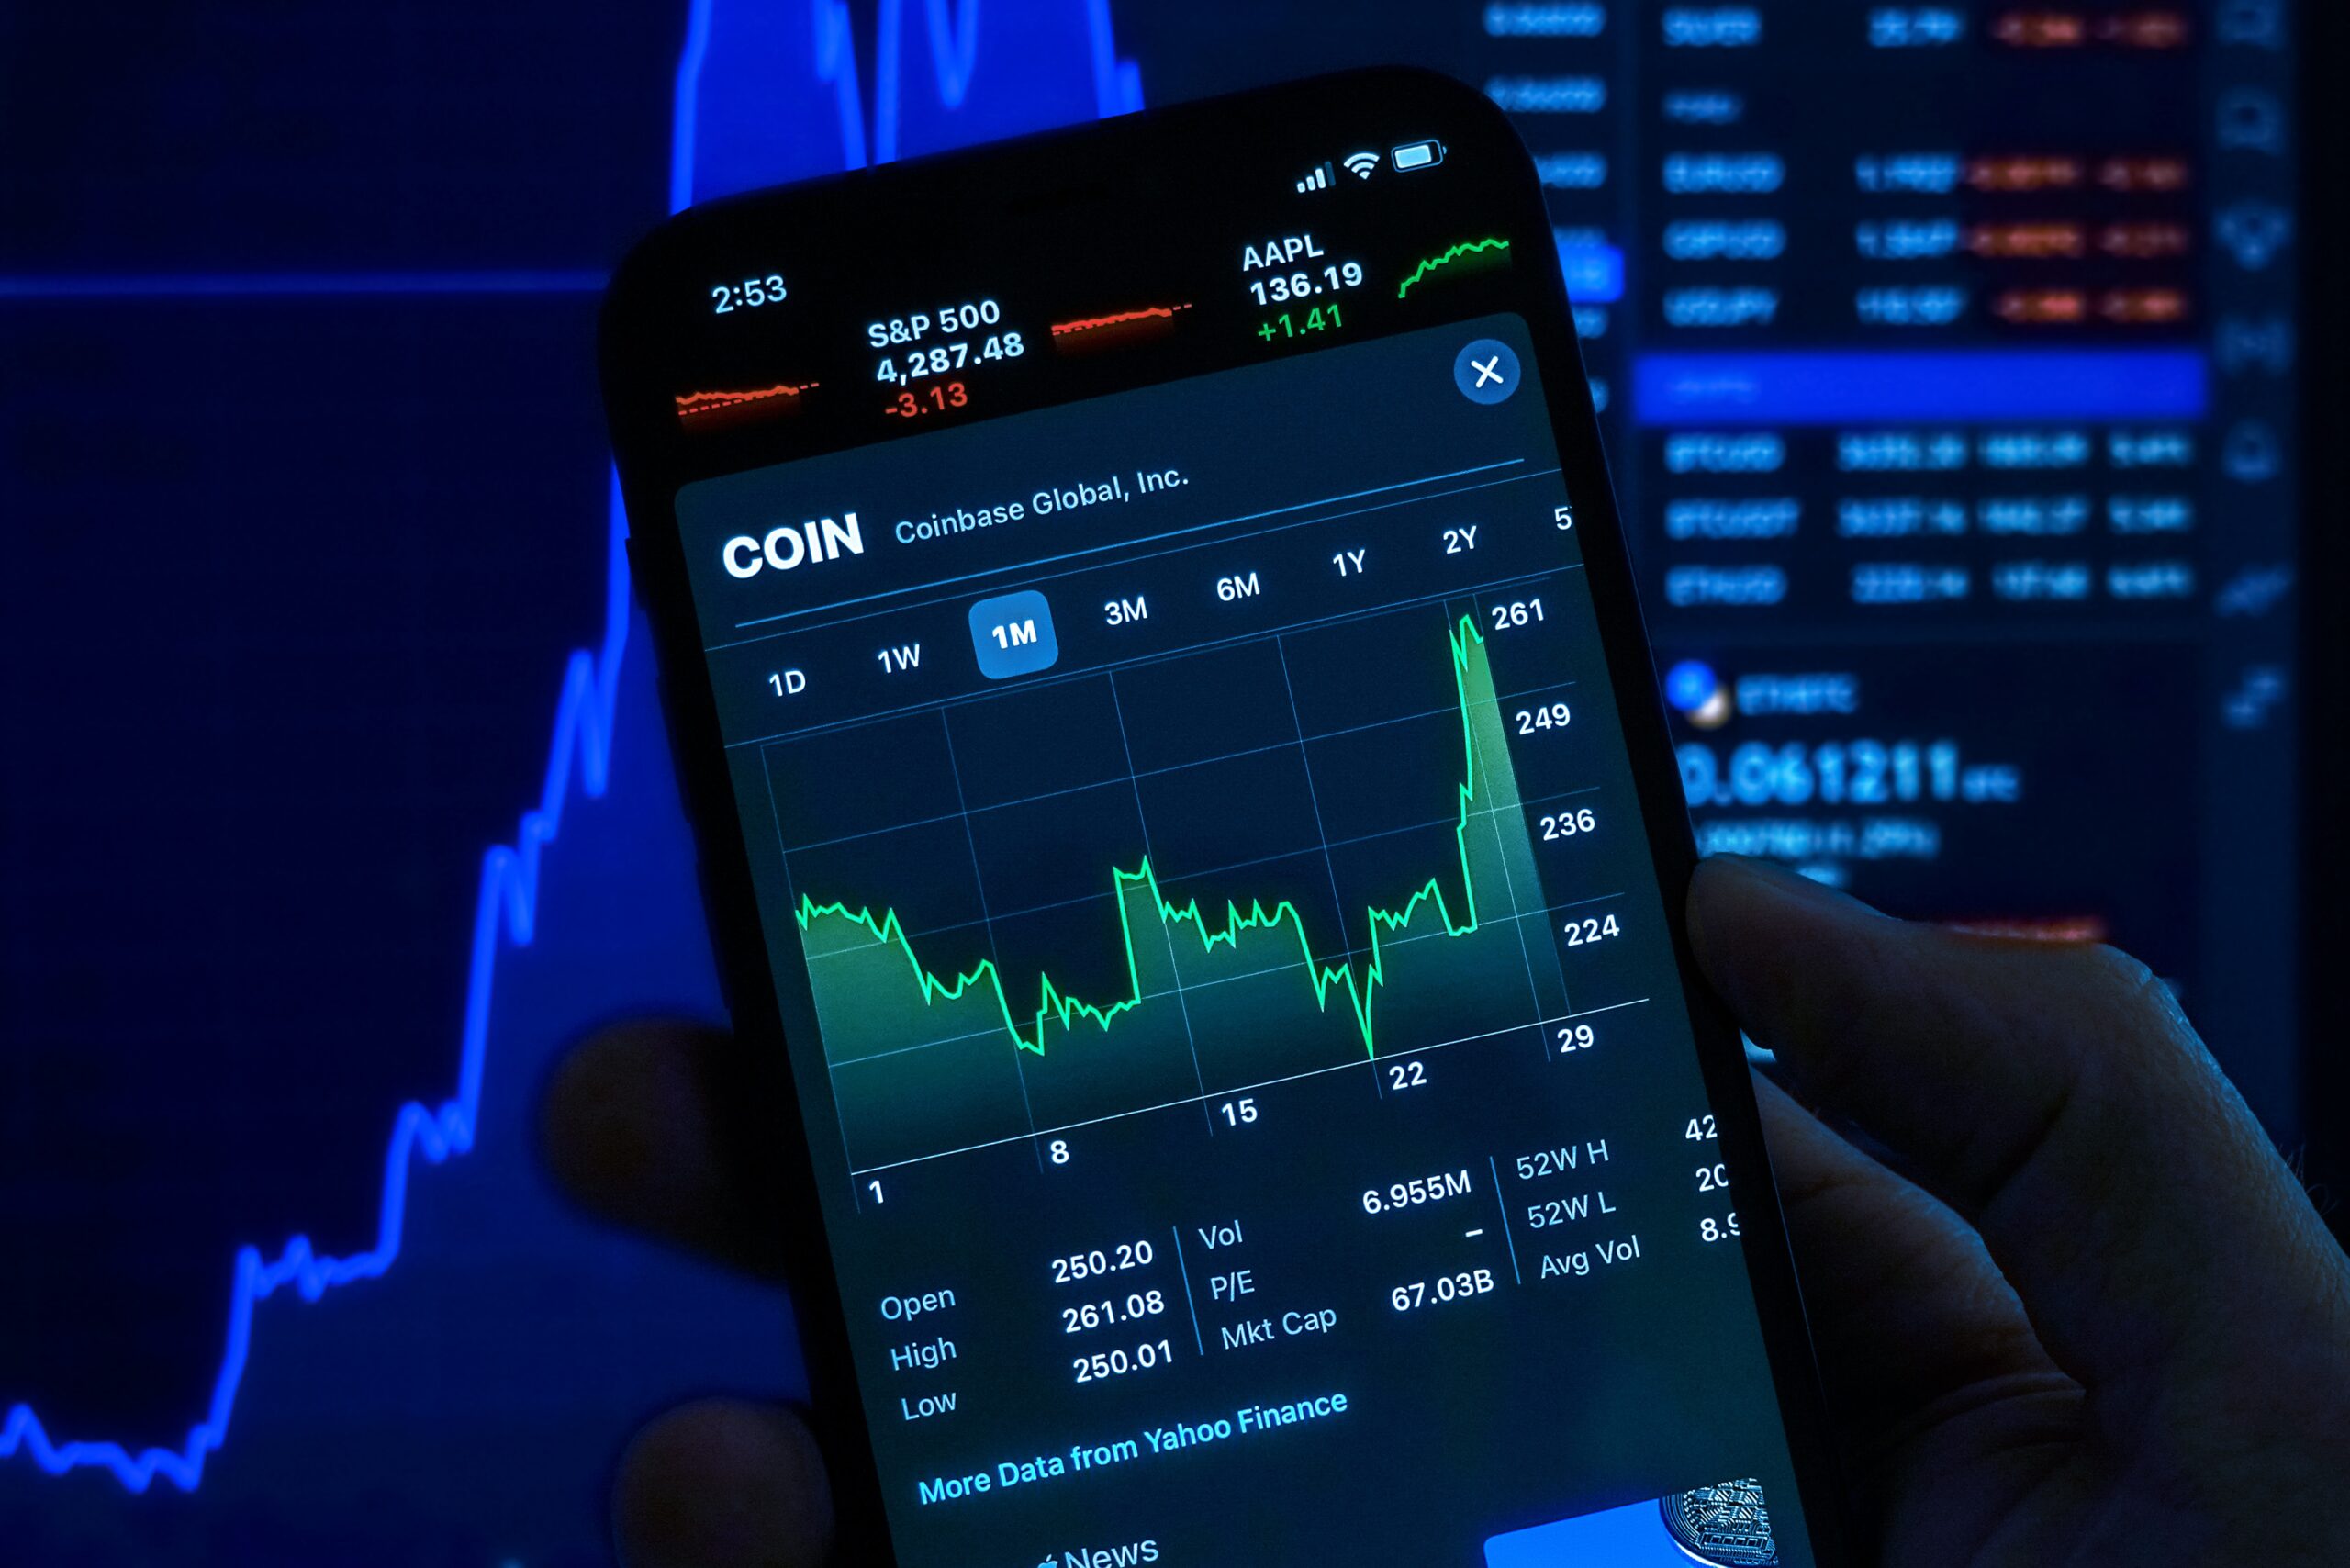 A stock market chart is being shown on a mobile screen representing that investing in stock market may lead to financial independence